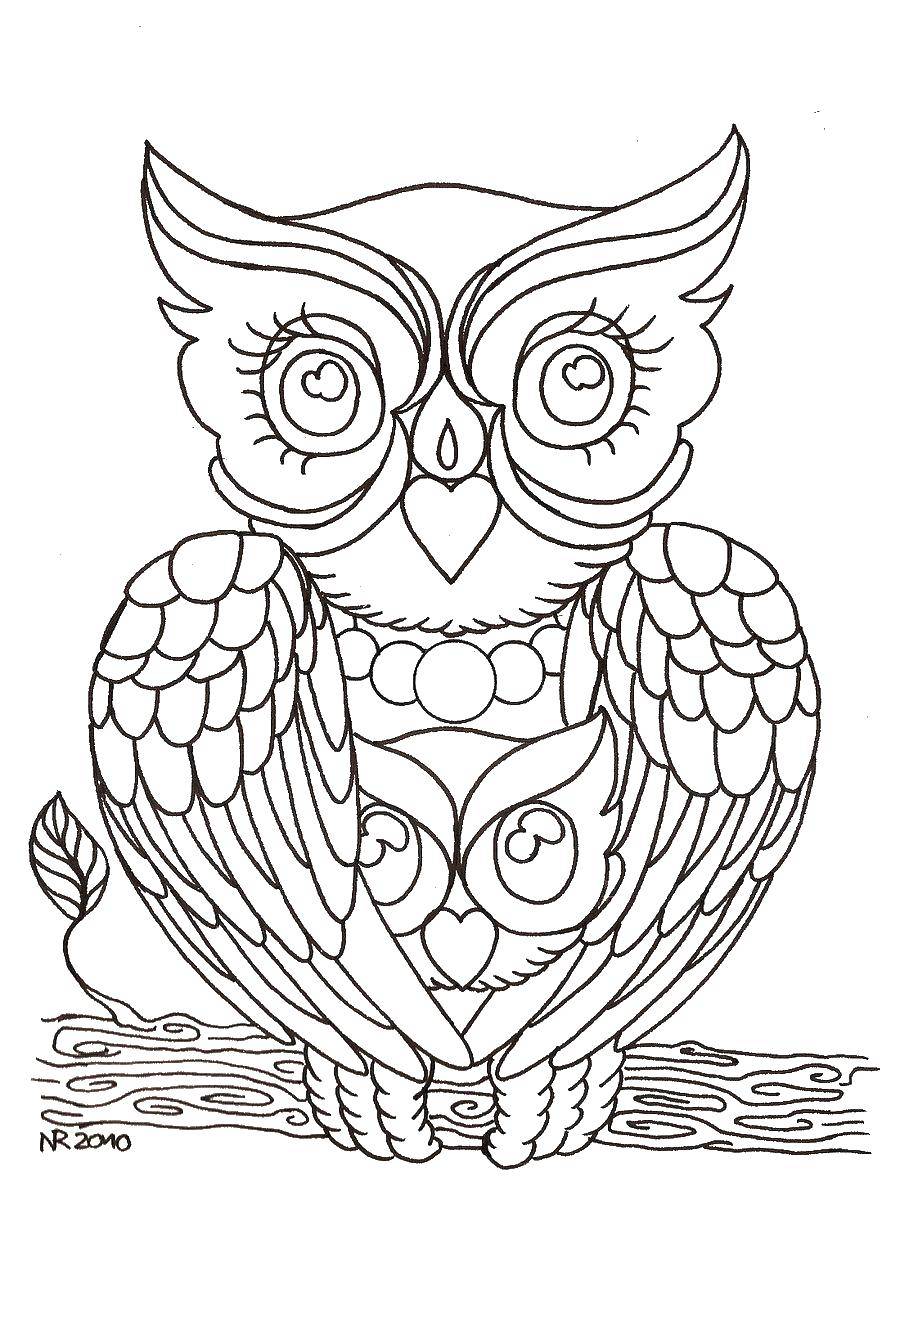 Coloring Owl on a tree branch. Category birds. Tags:  Birds, owl.